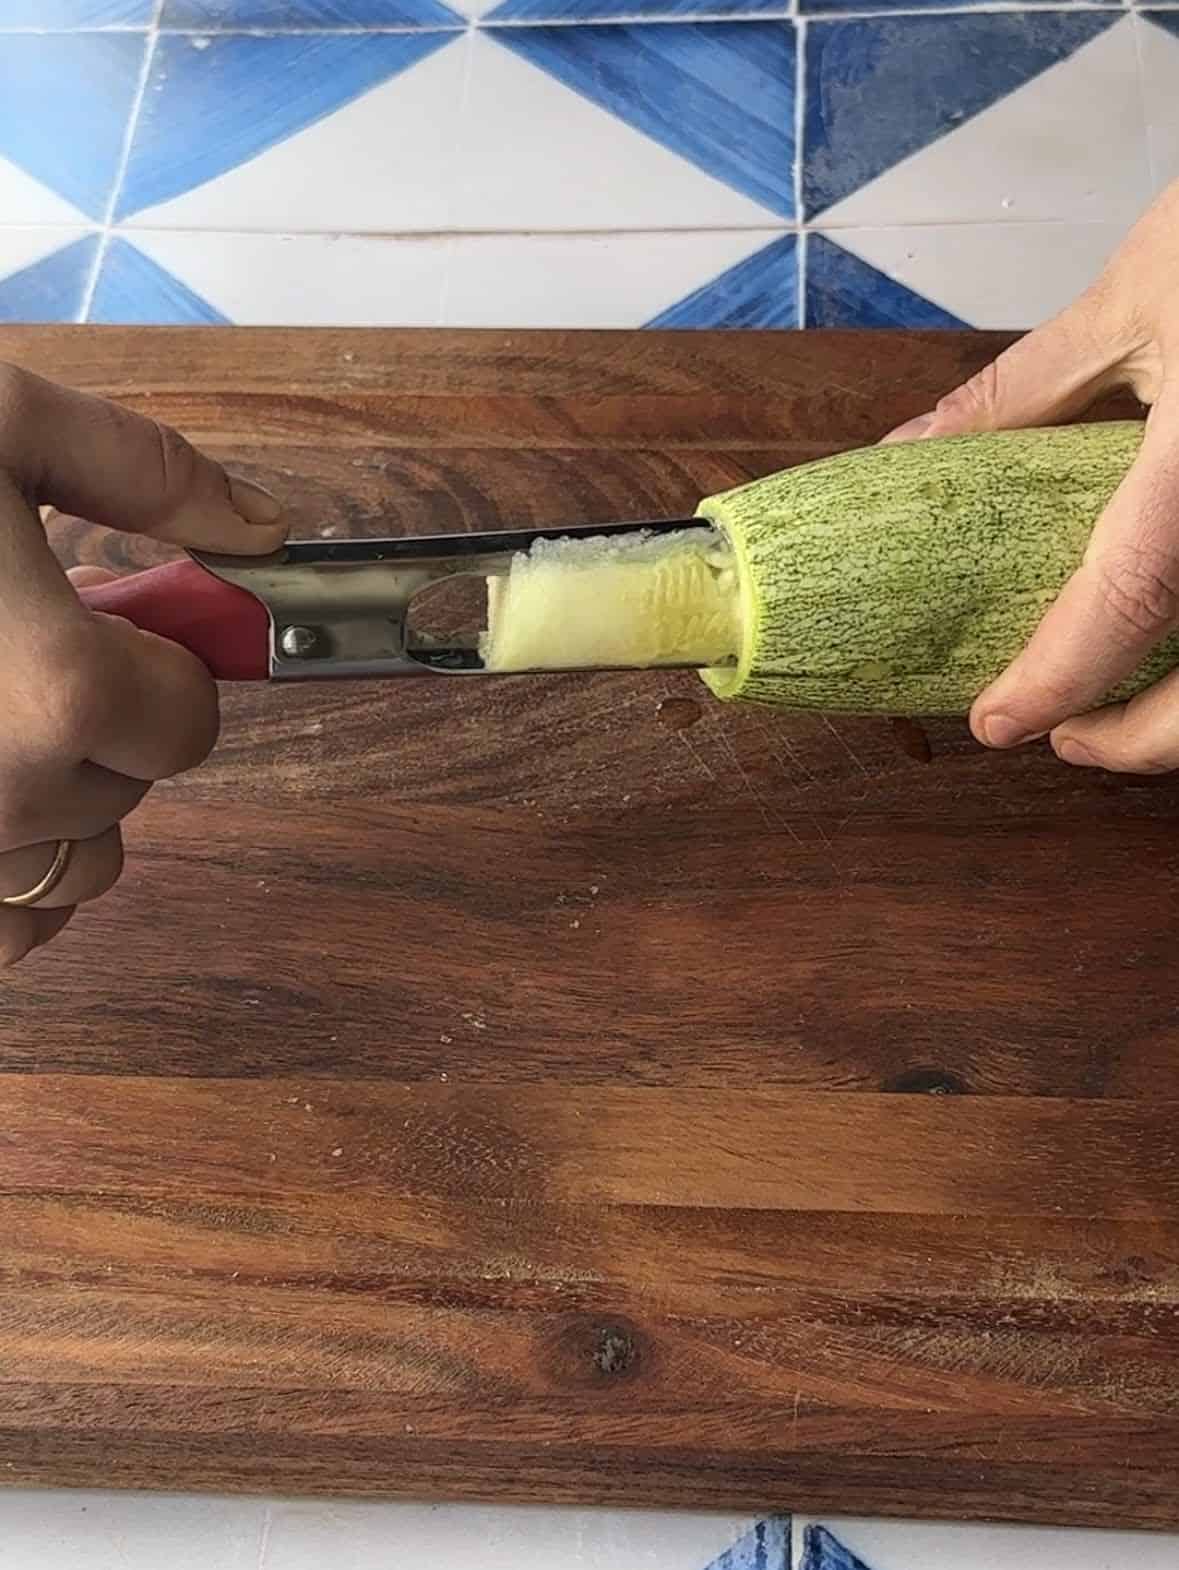 use an apple corer to core the zucchini and empty out its content